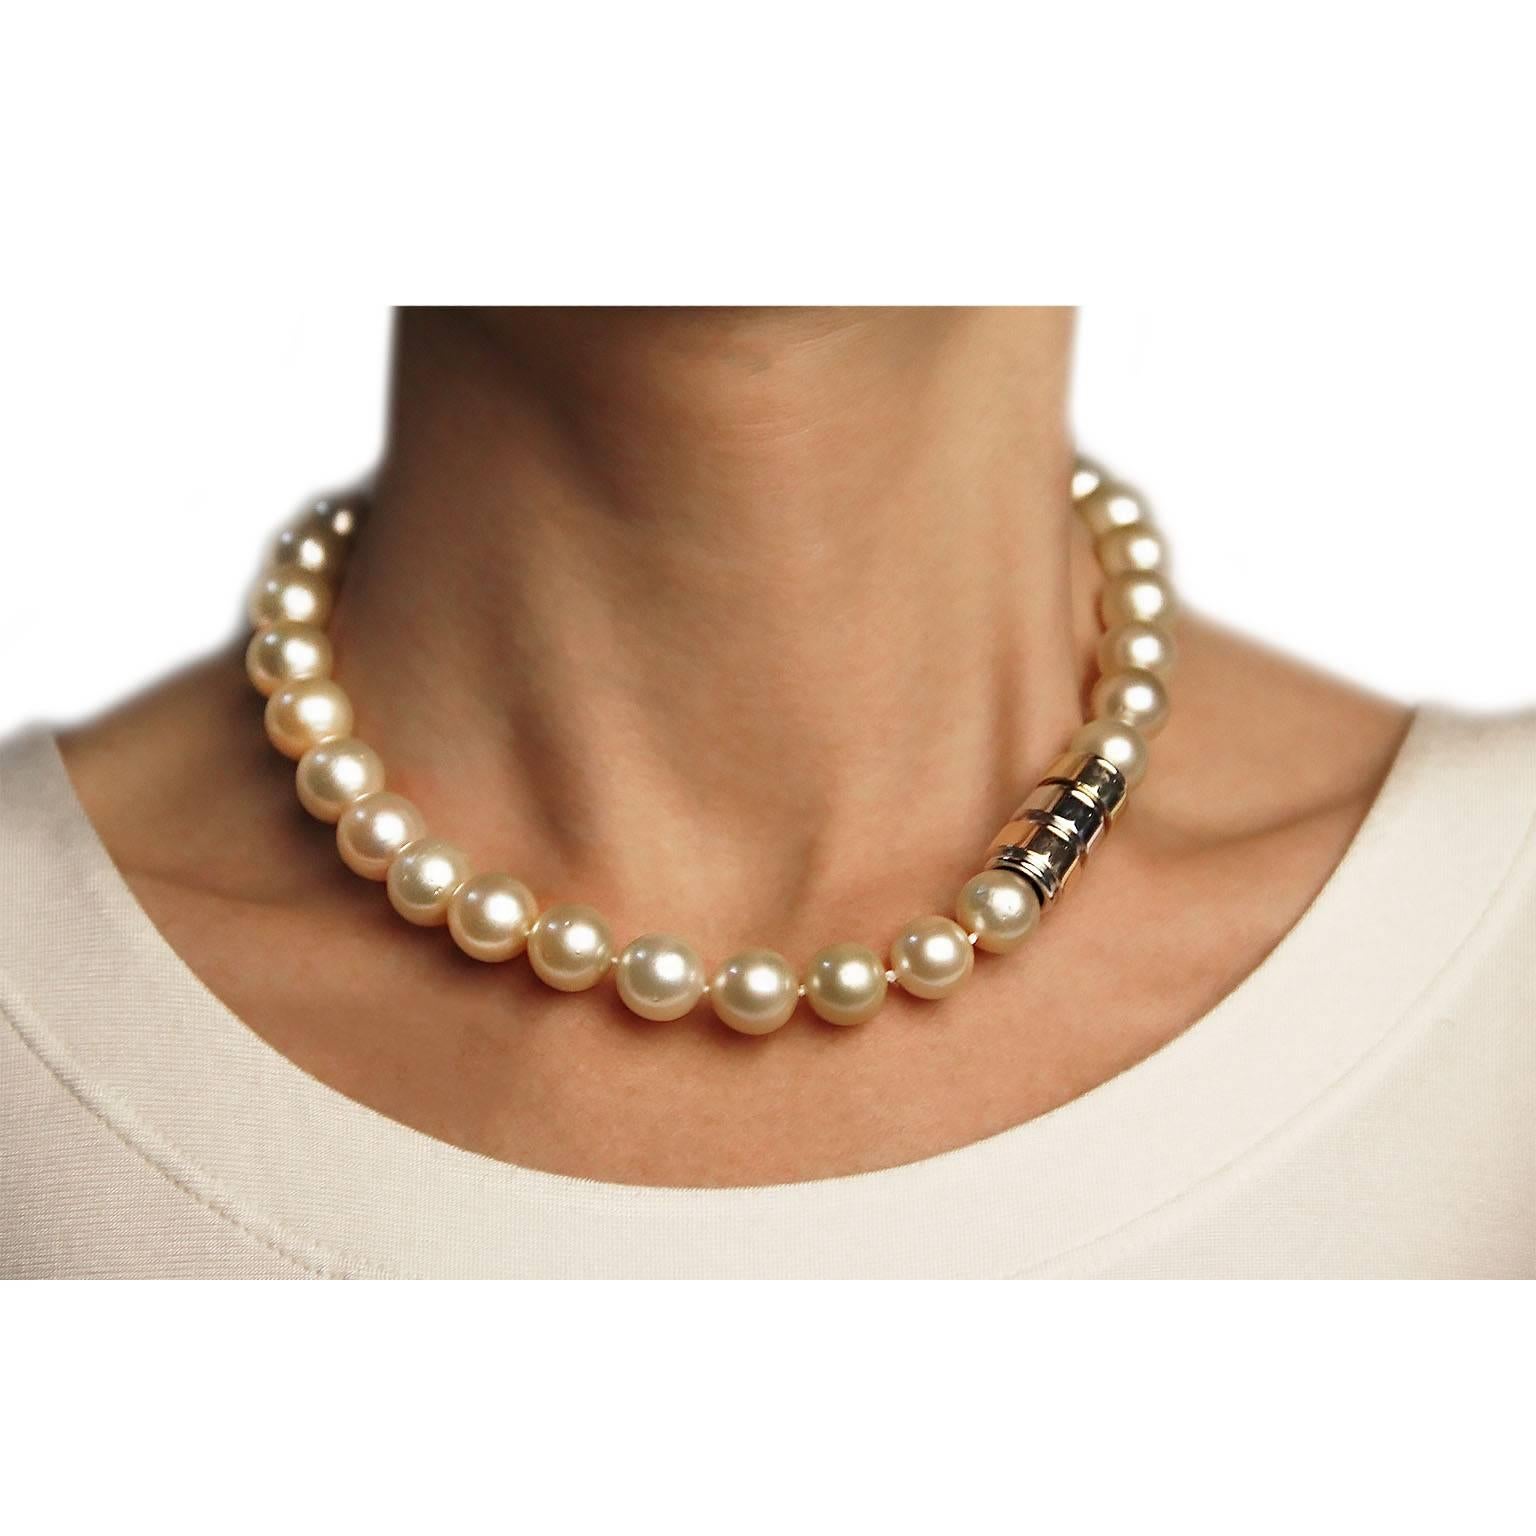 Golden South Sea Pearl Necklace 1